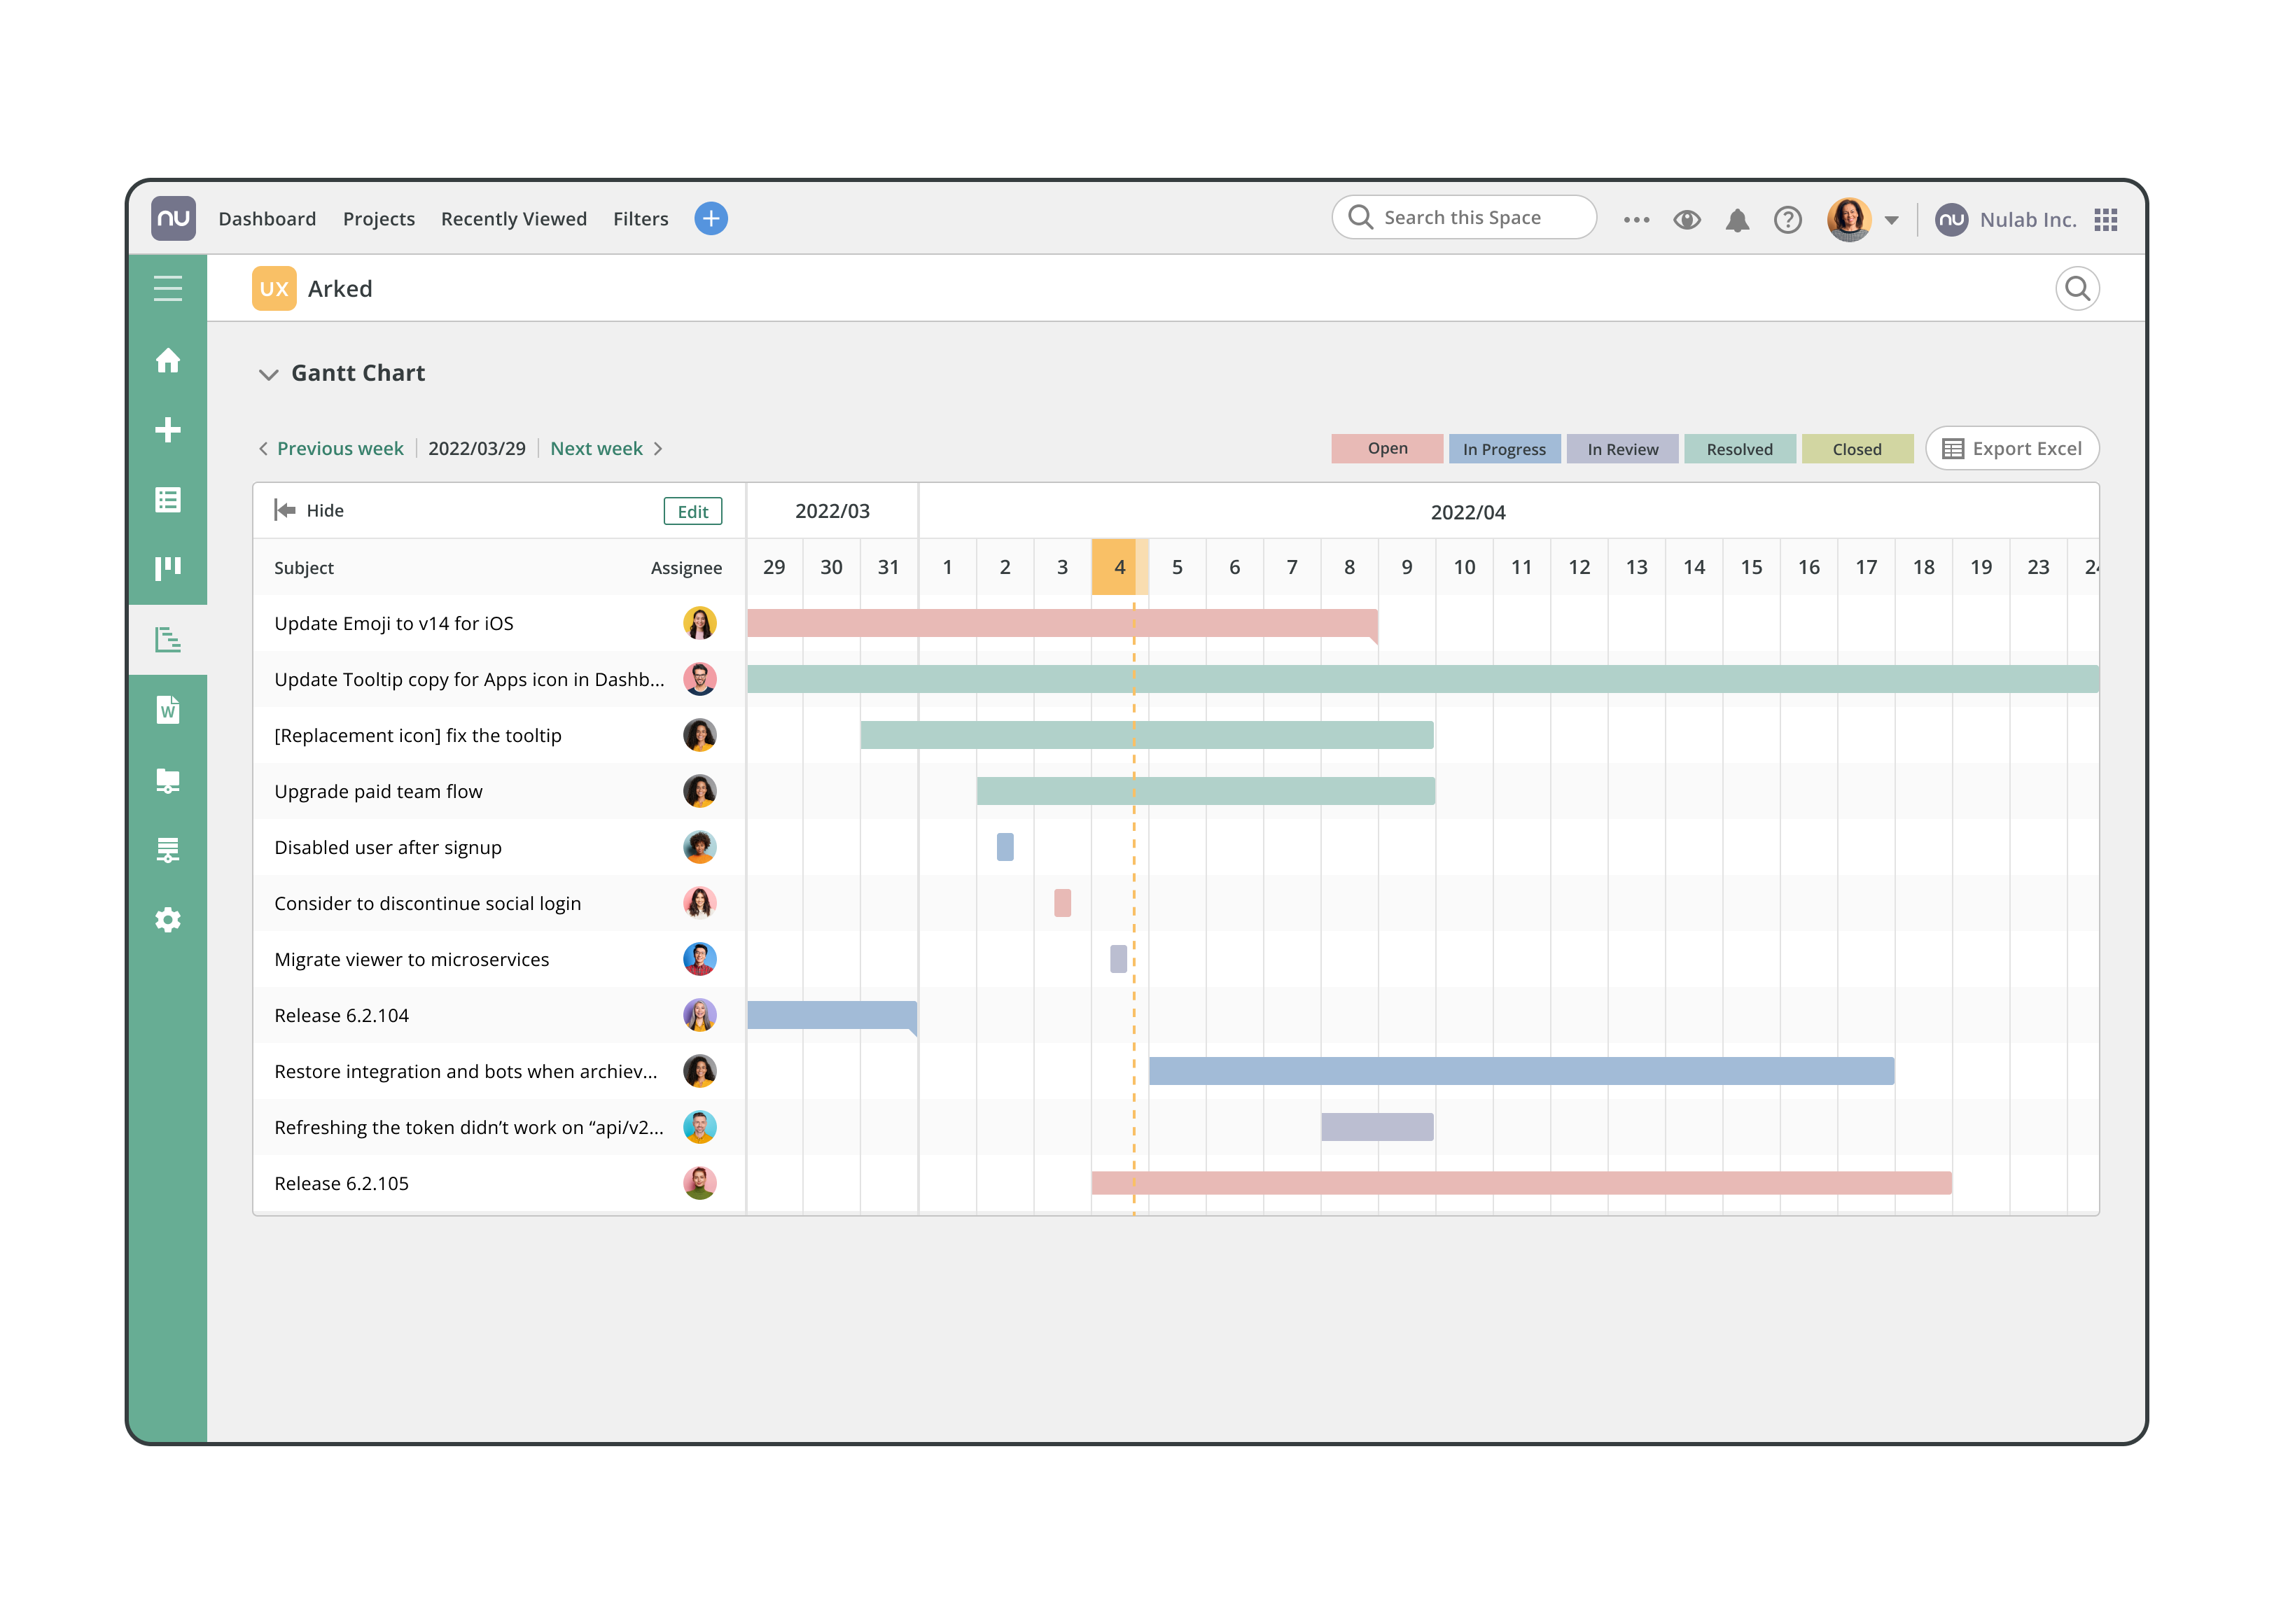 Get a full picture of your team's workload and timeline in the Gantt Chart view.